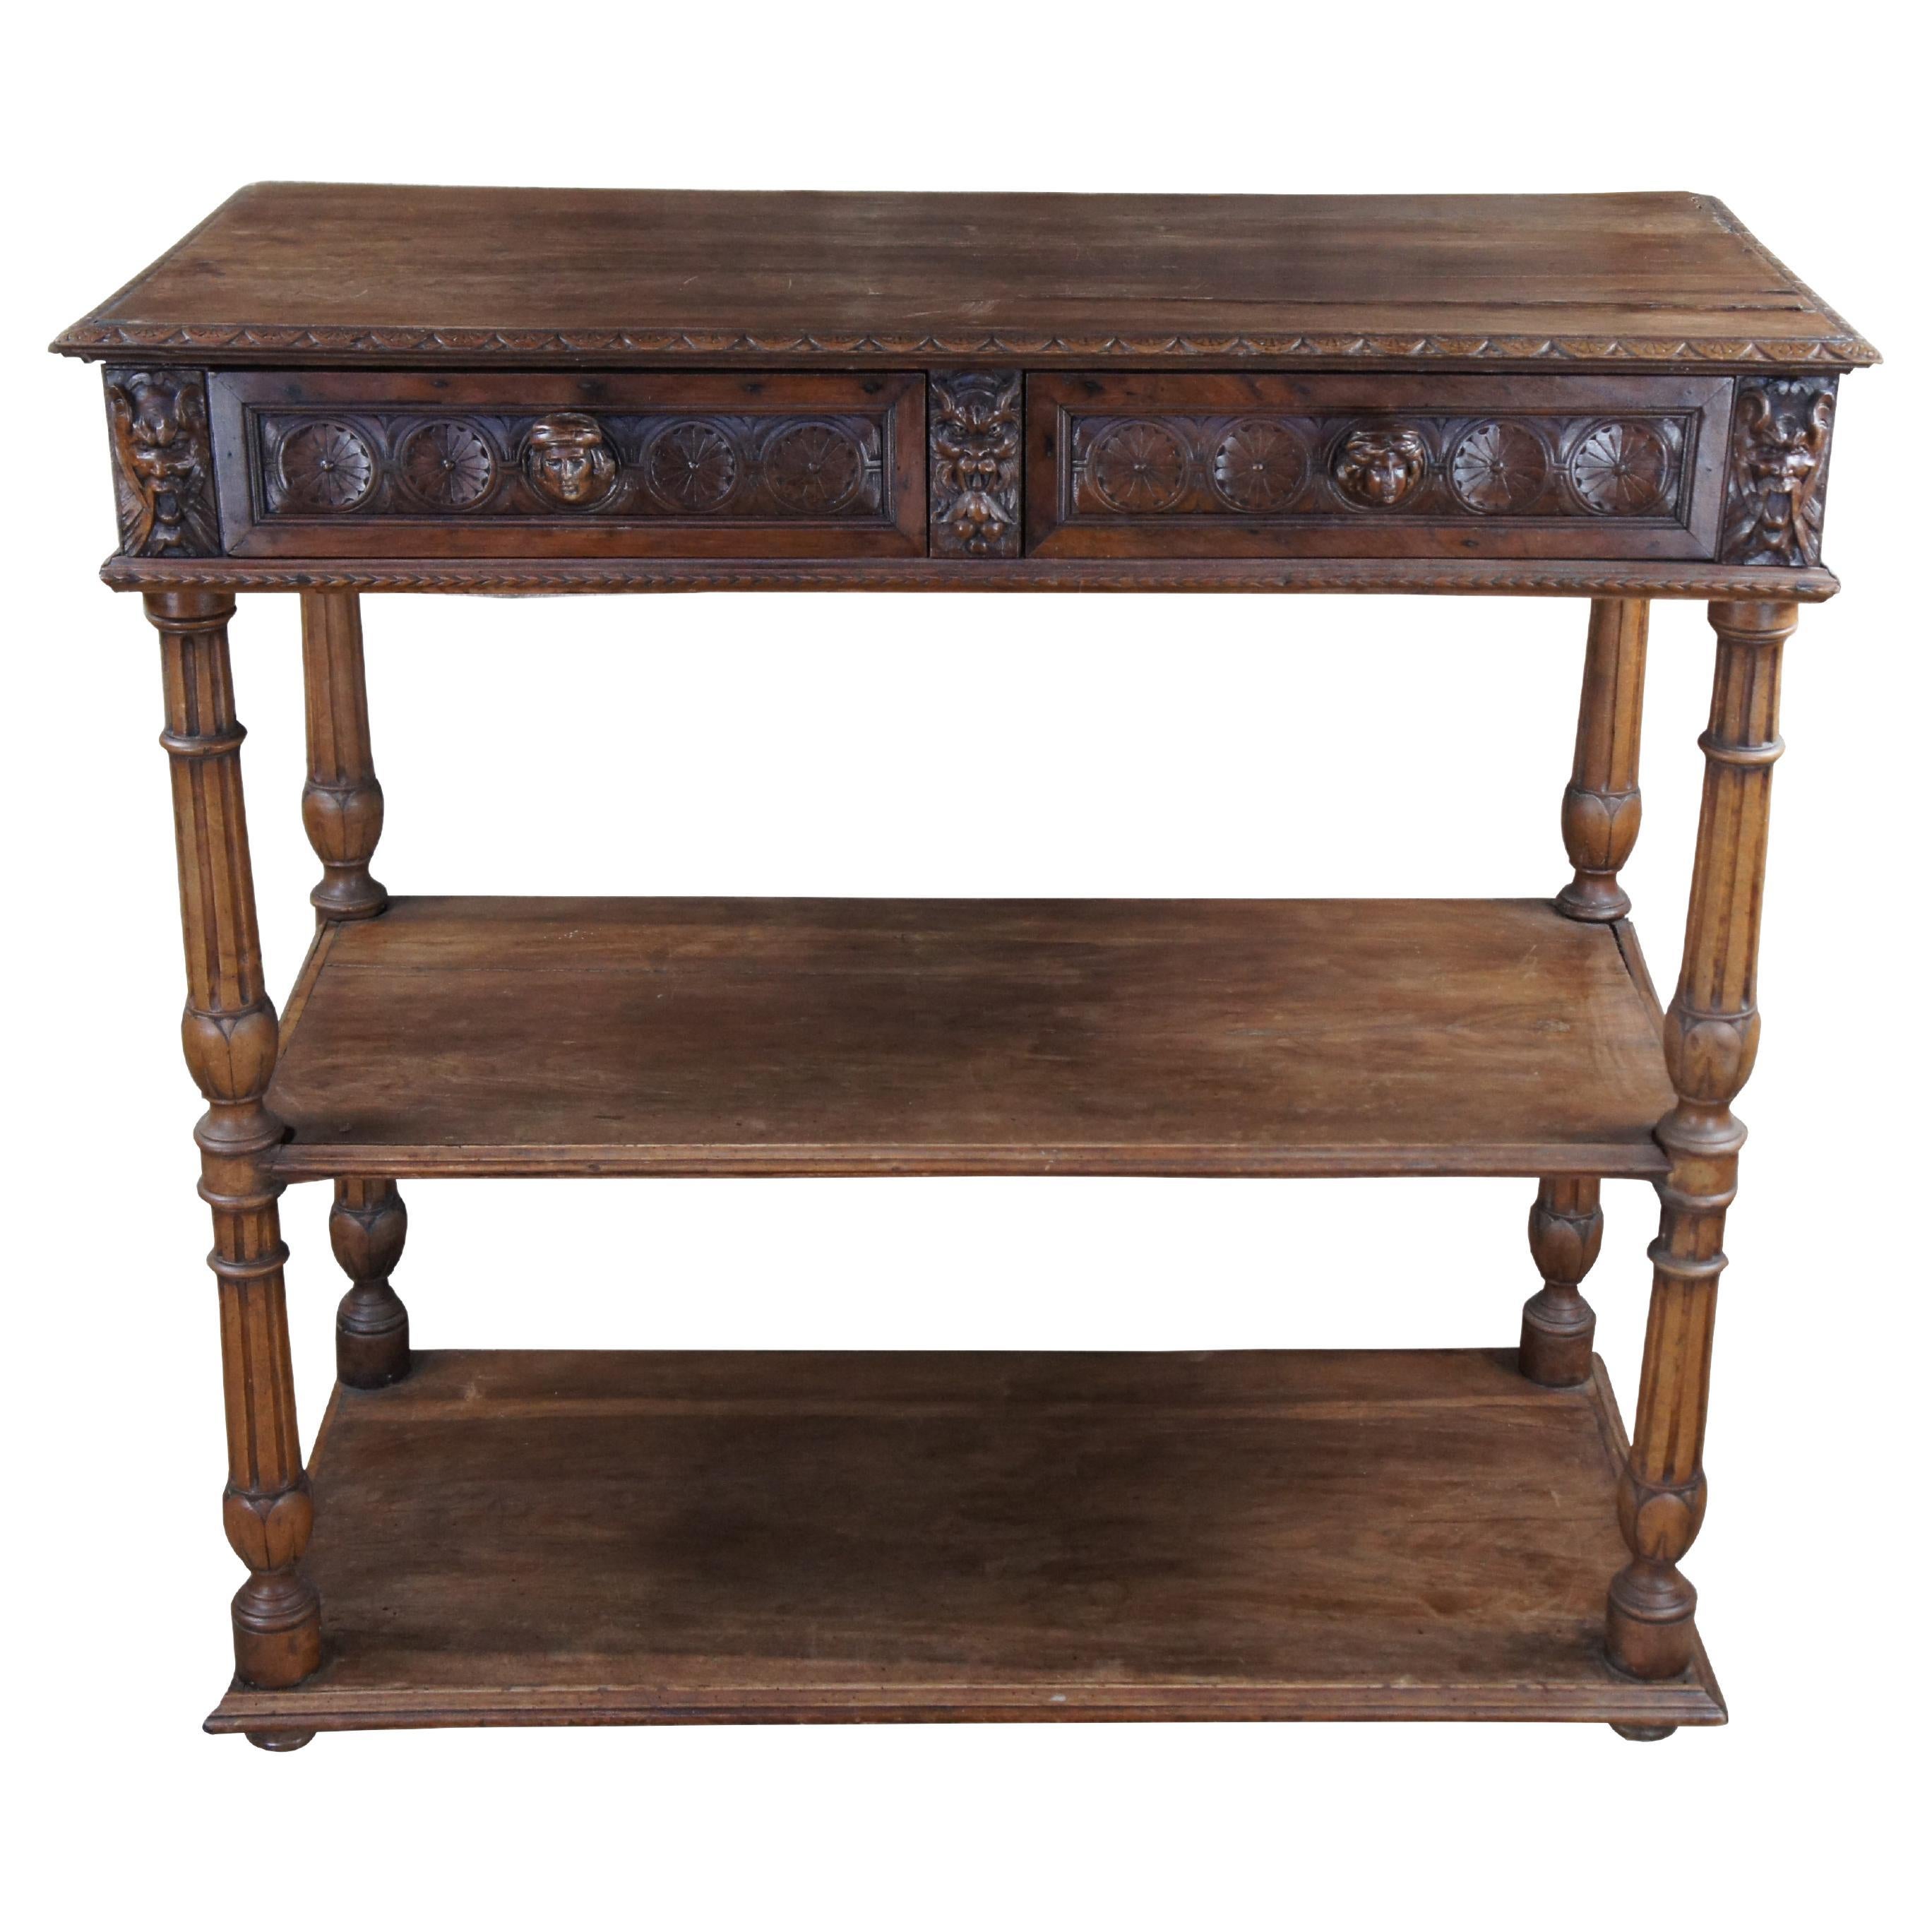 Antique 19th C. French Renaissance Revival Carved Walnut Buffet Server Dry Bar For Sale